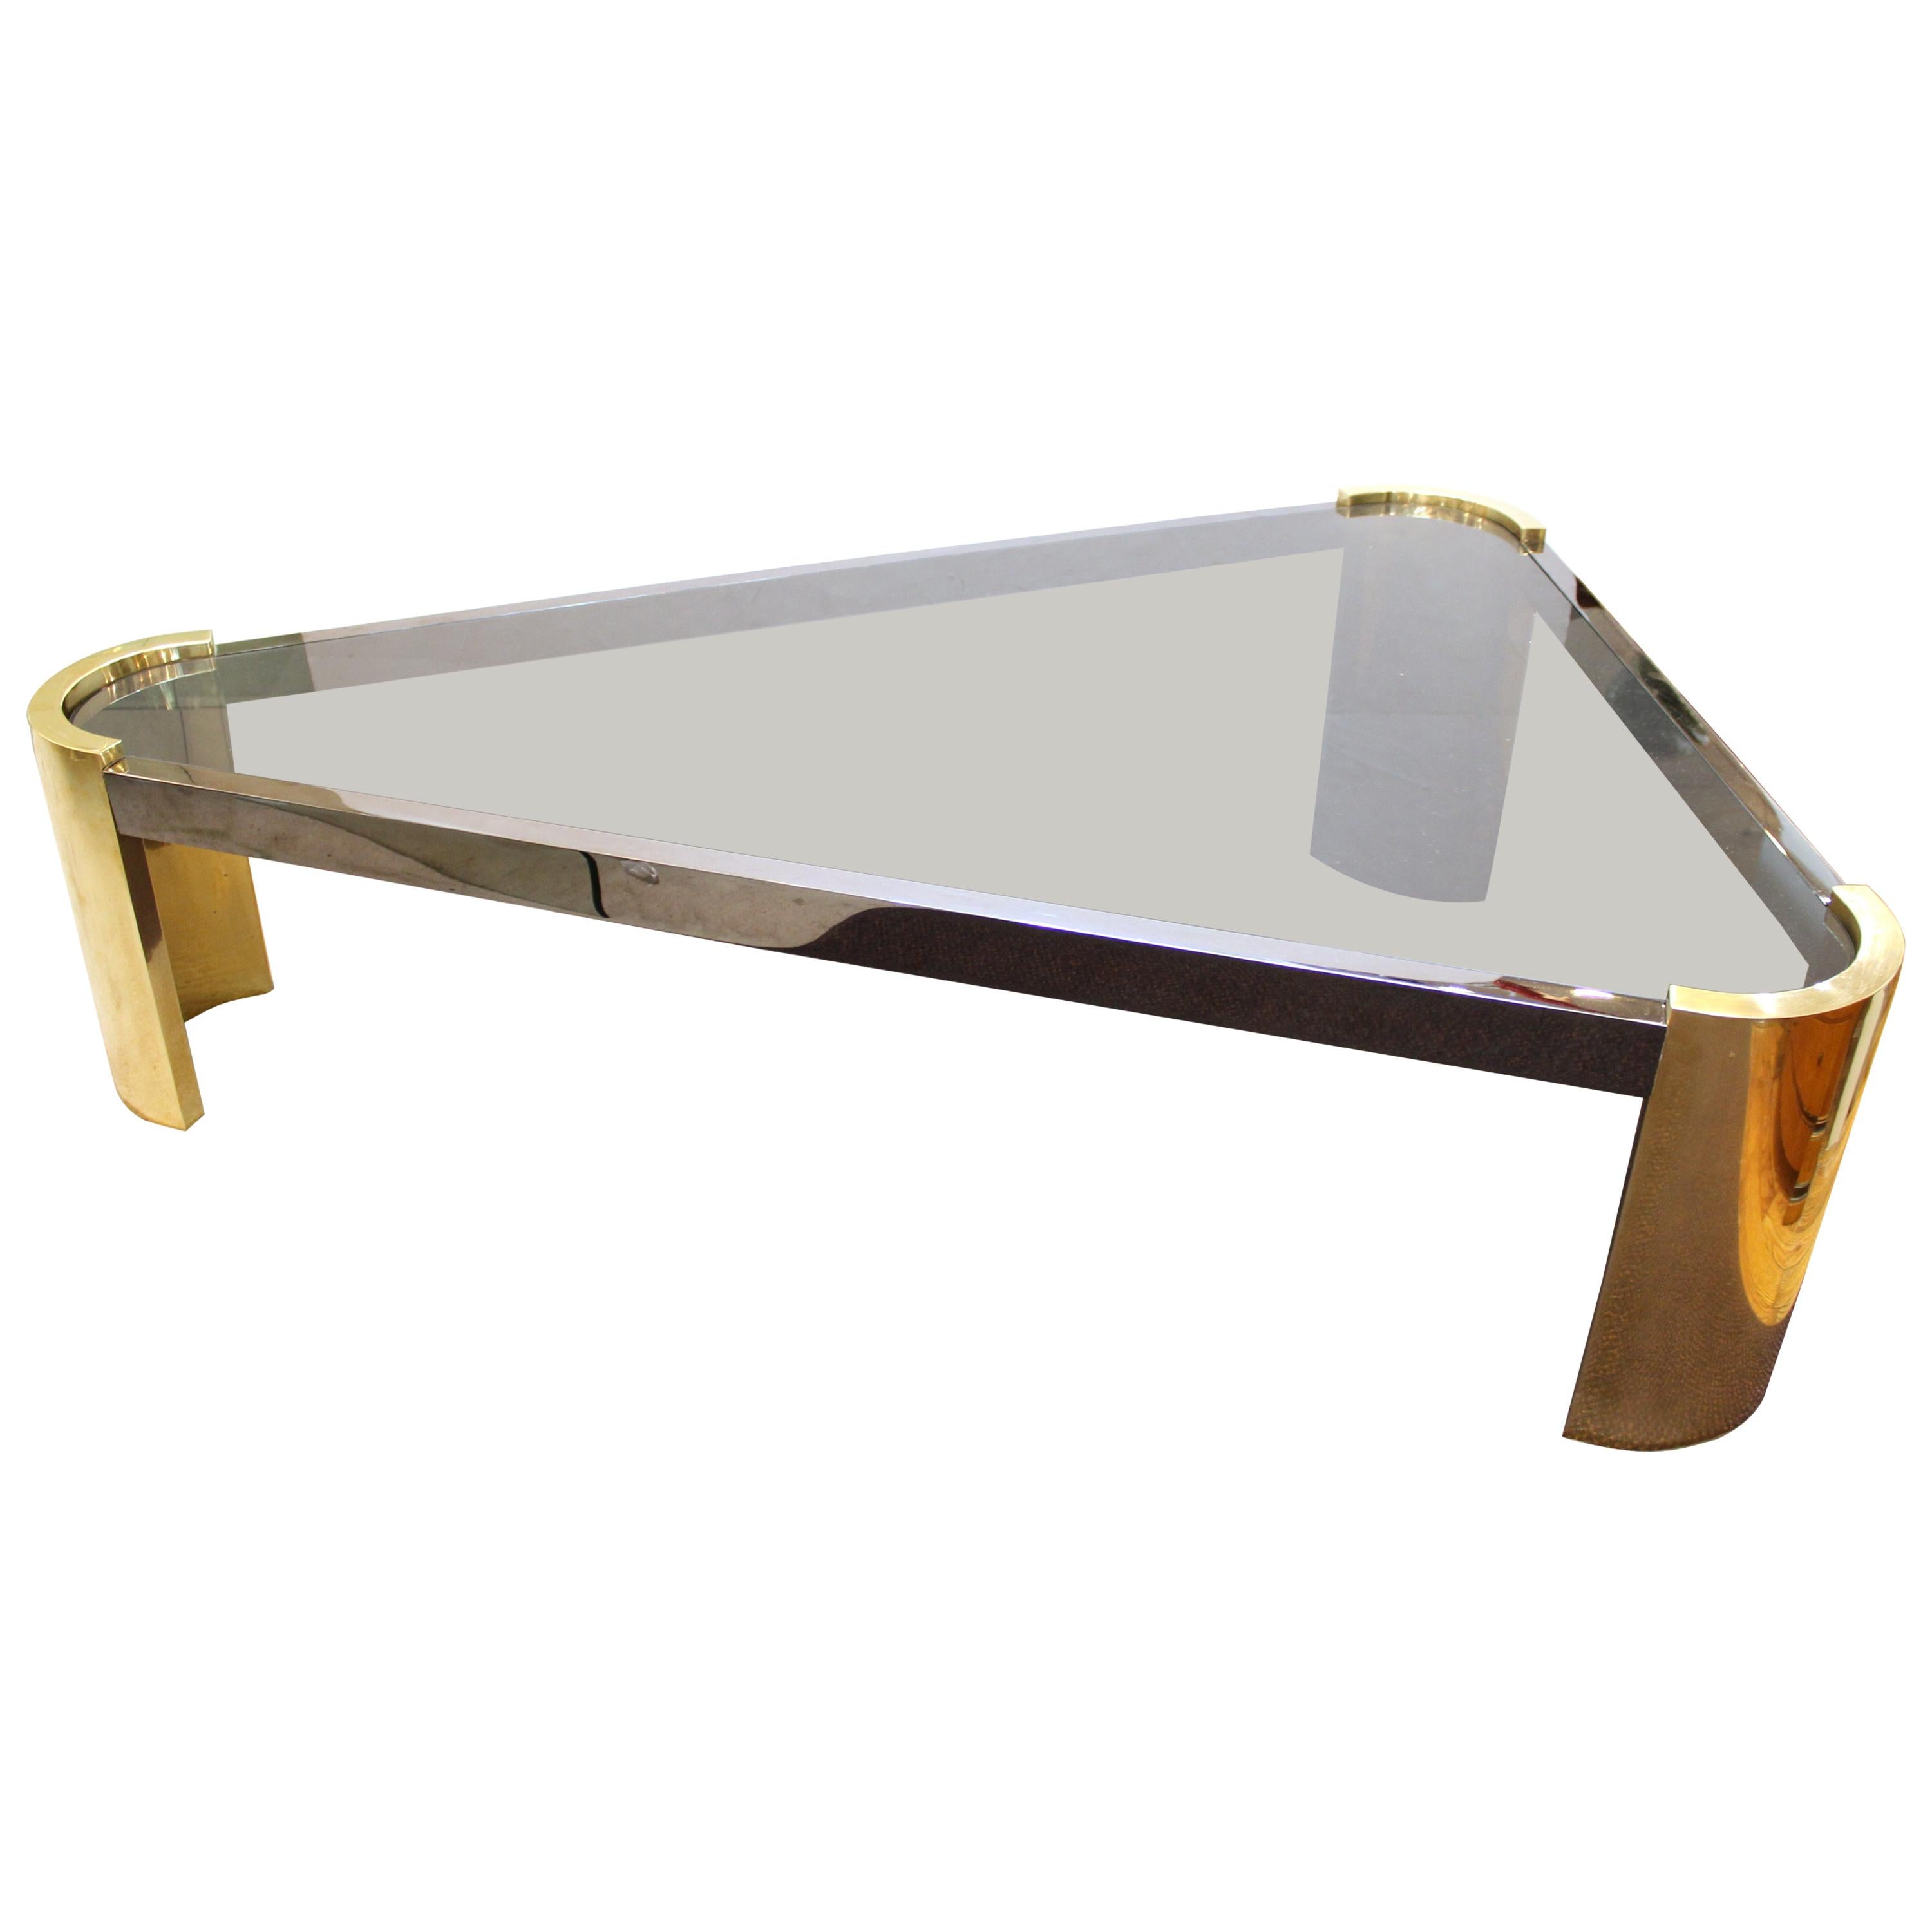 Jay Spectre Modernist Triangular Cocktail Table in Metal and Glass